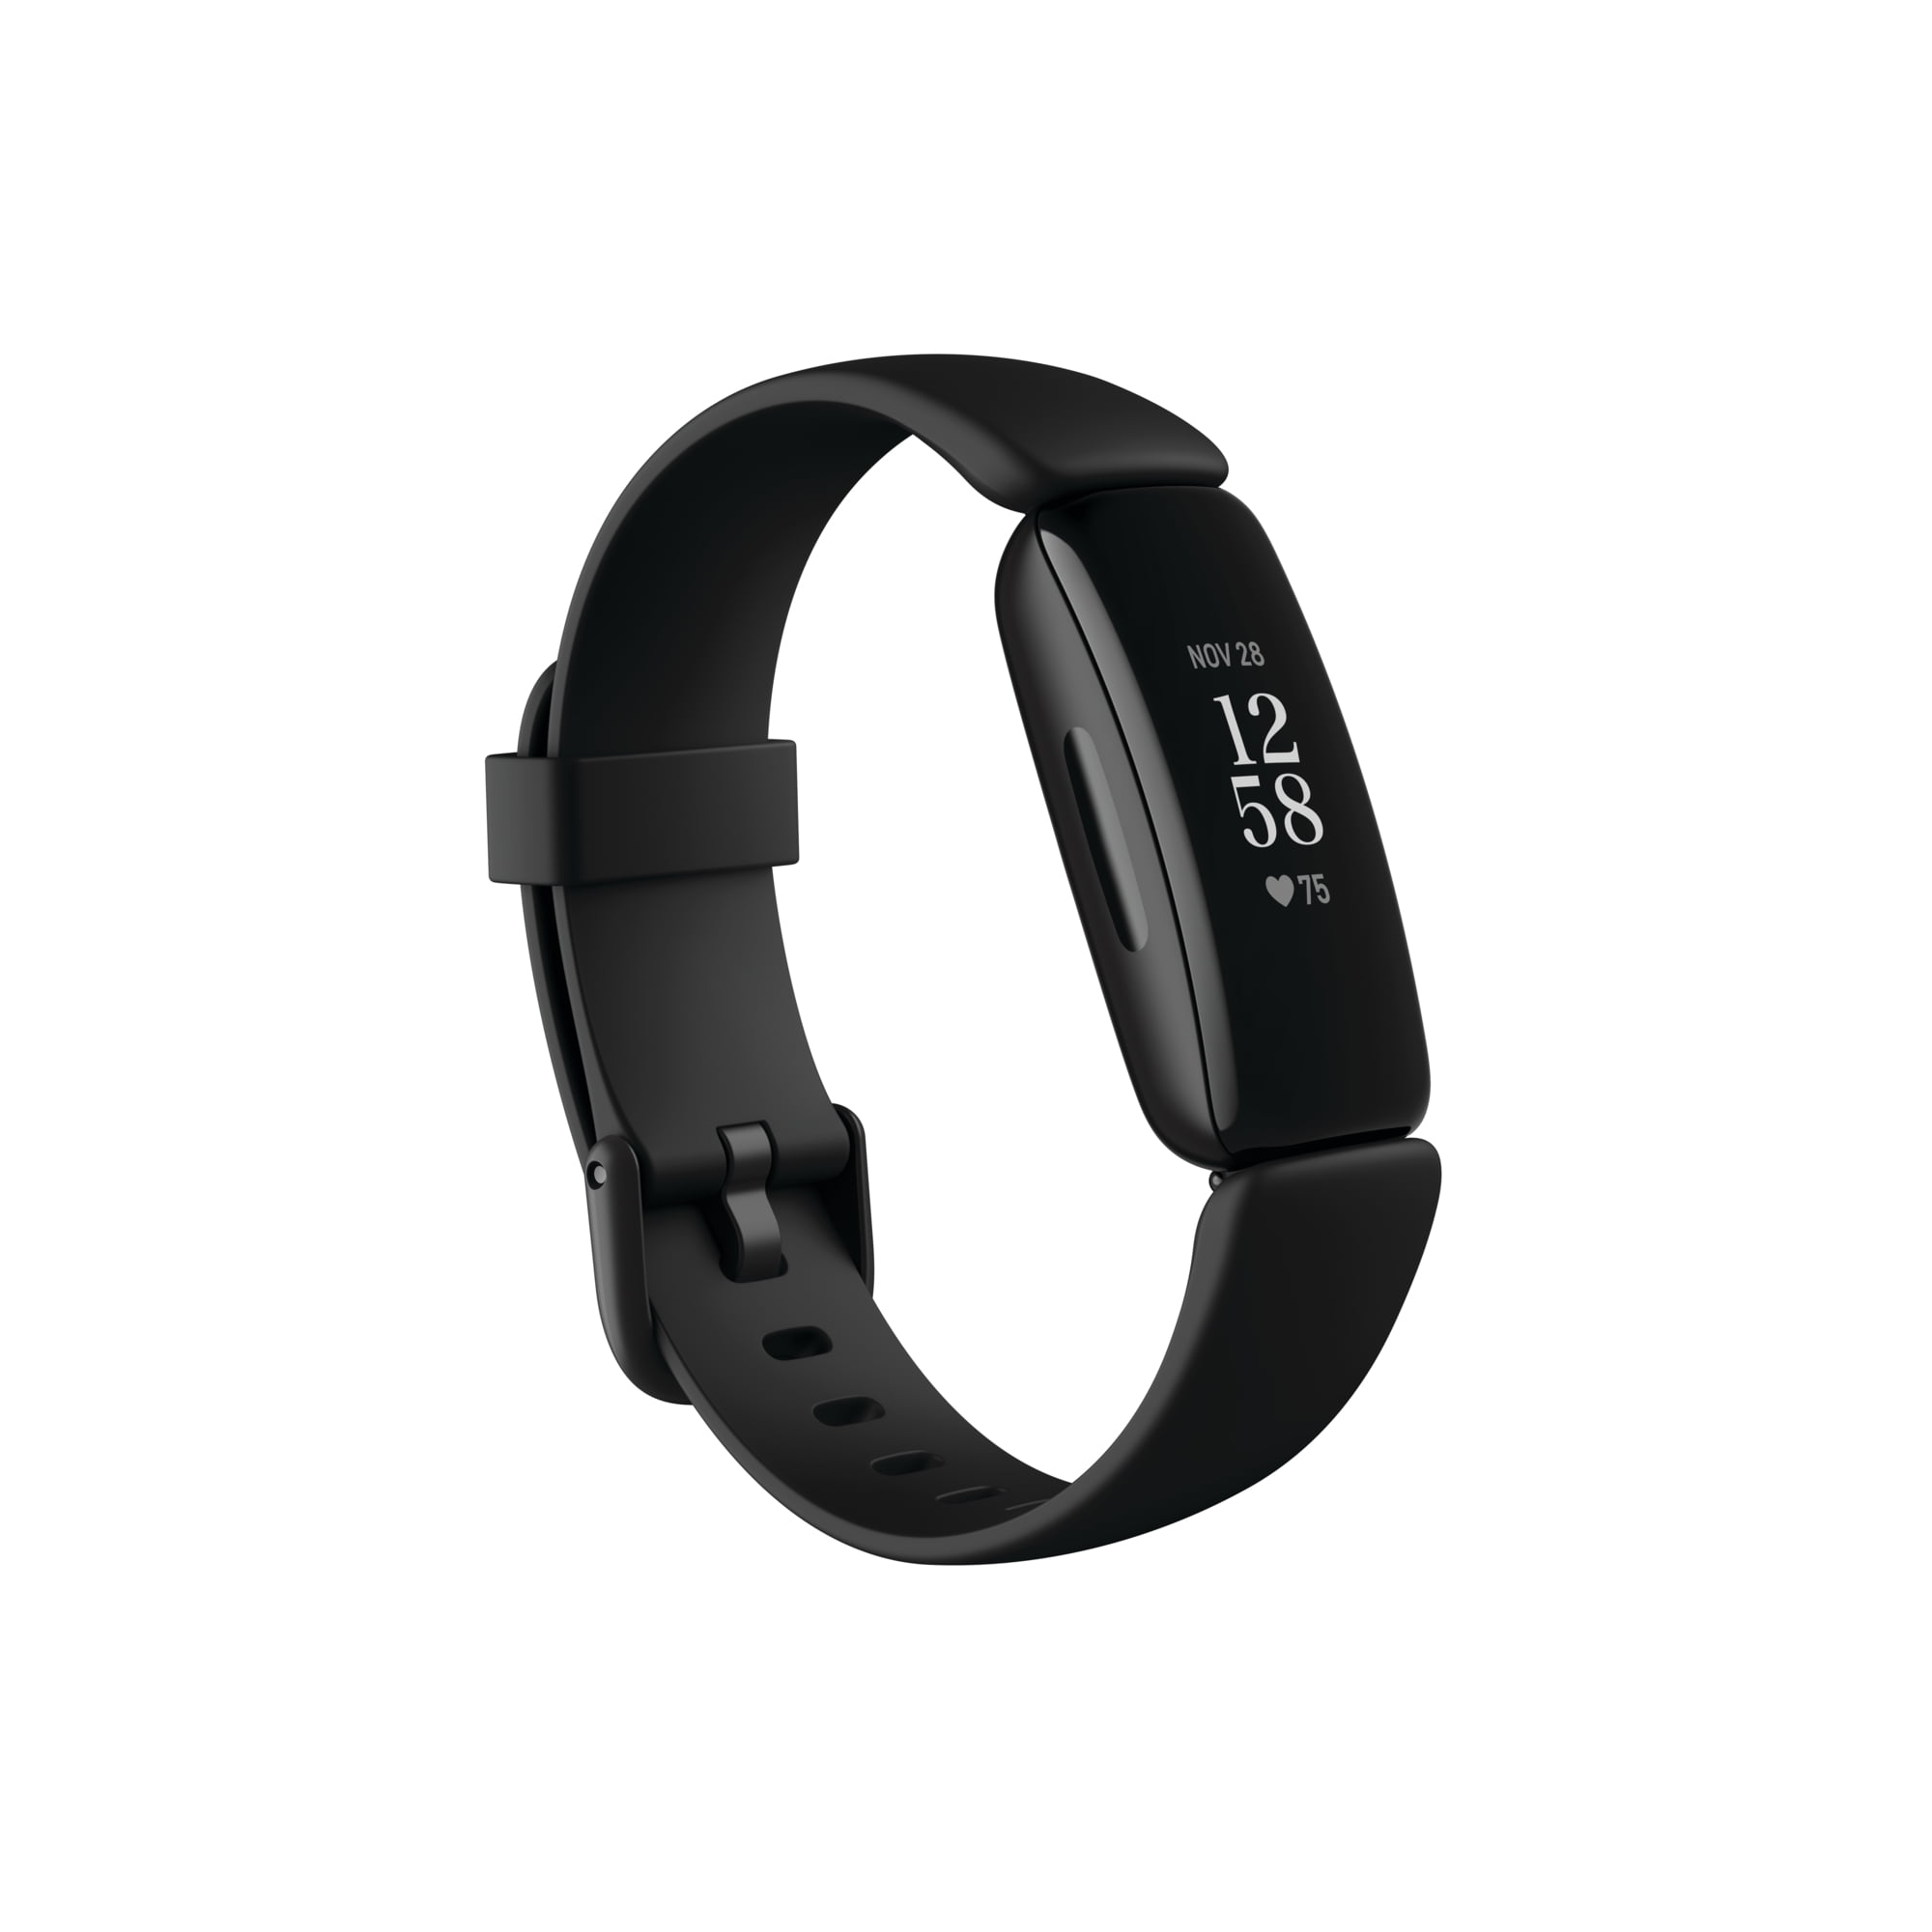 Fitbit Inspire Fitness Activity Tracker Black for sale online 